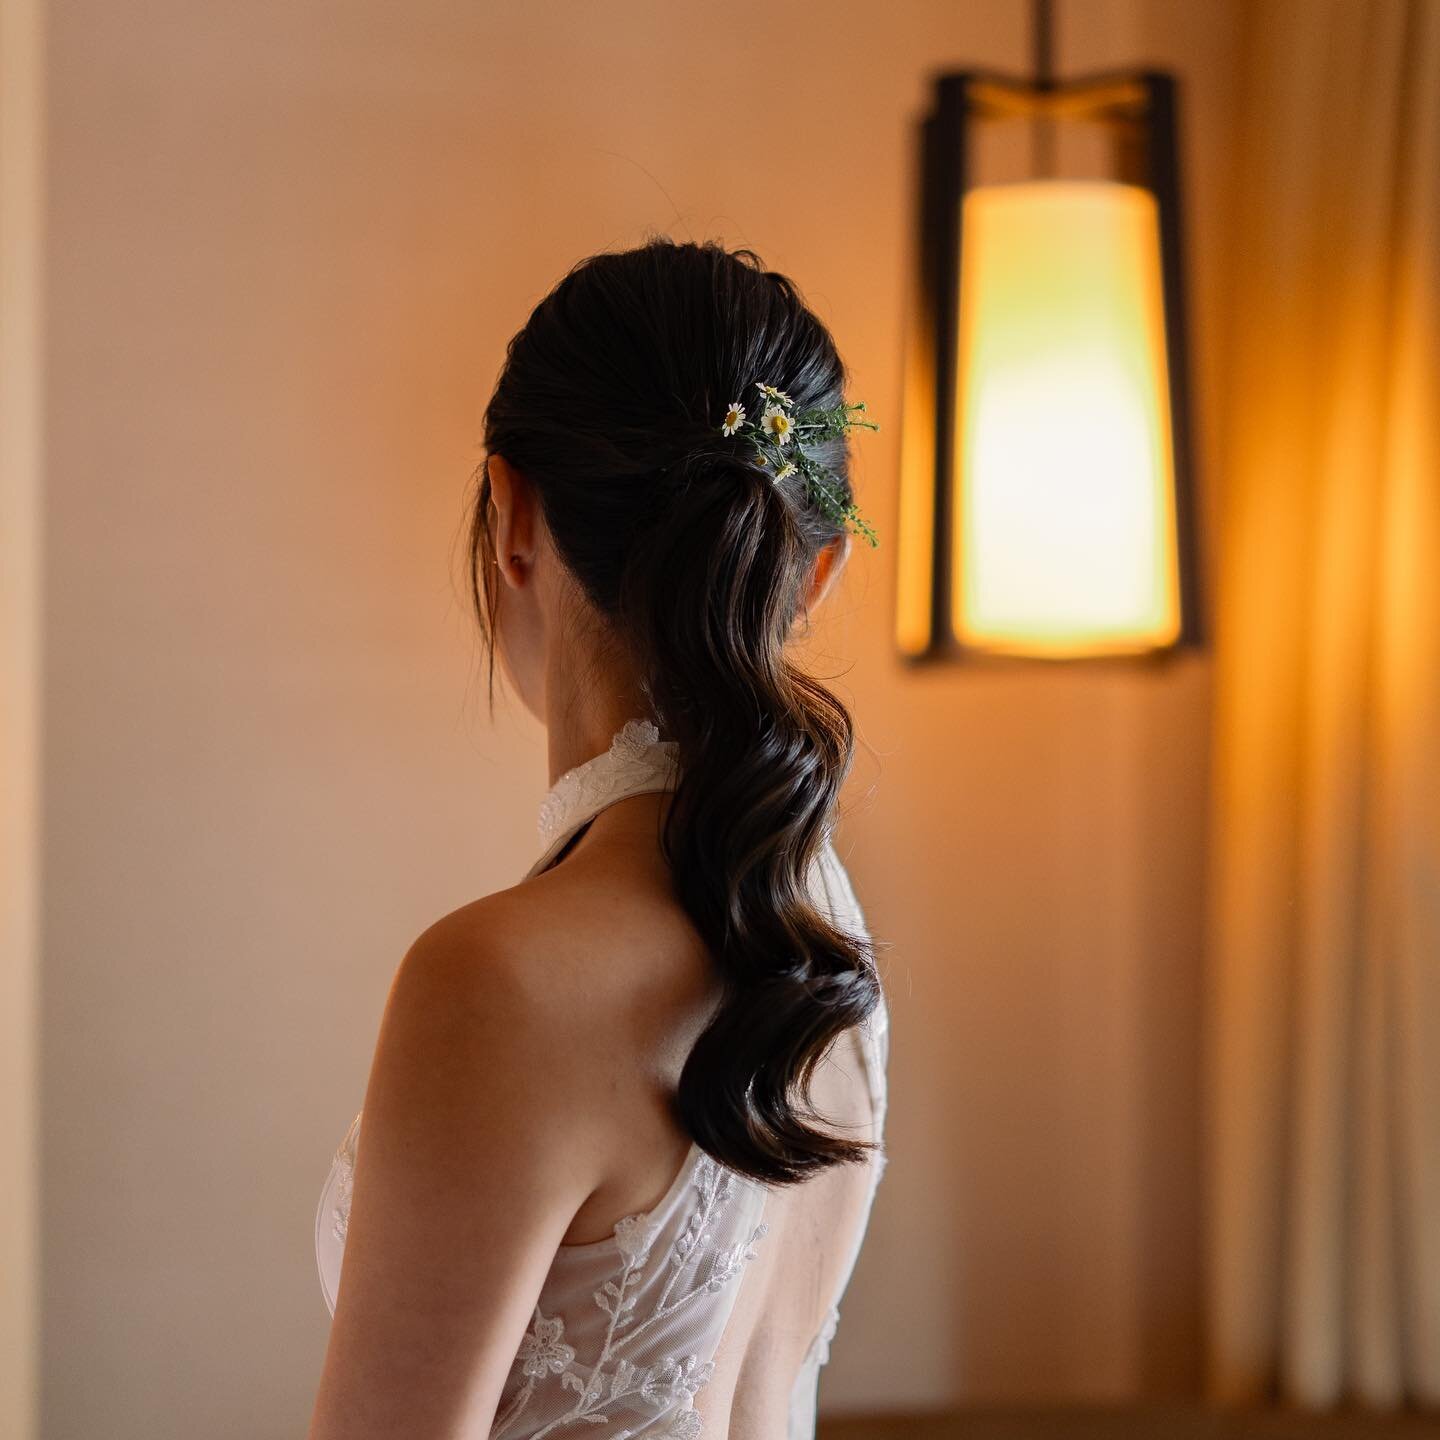 Hollywood waves ponytail; Textured version!

Really appreciate these detail shots from @thecurious.kind which are so beautiful and artistic ✨❤️

And the sweetest bride to work with, @anglyn_ ❤️